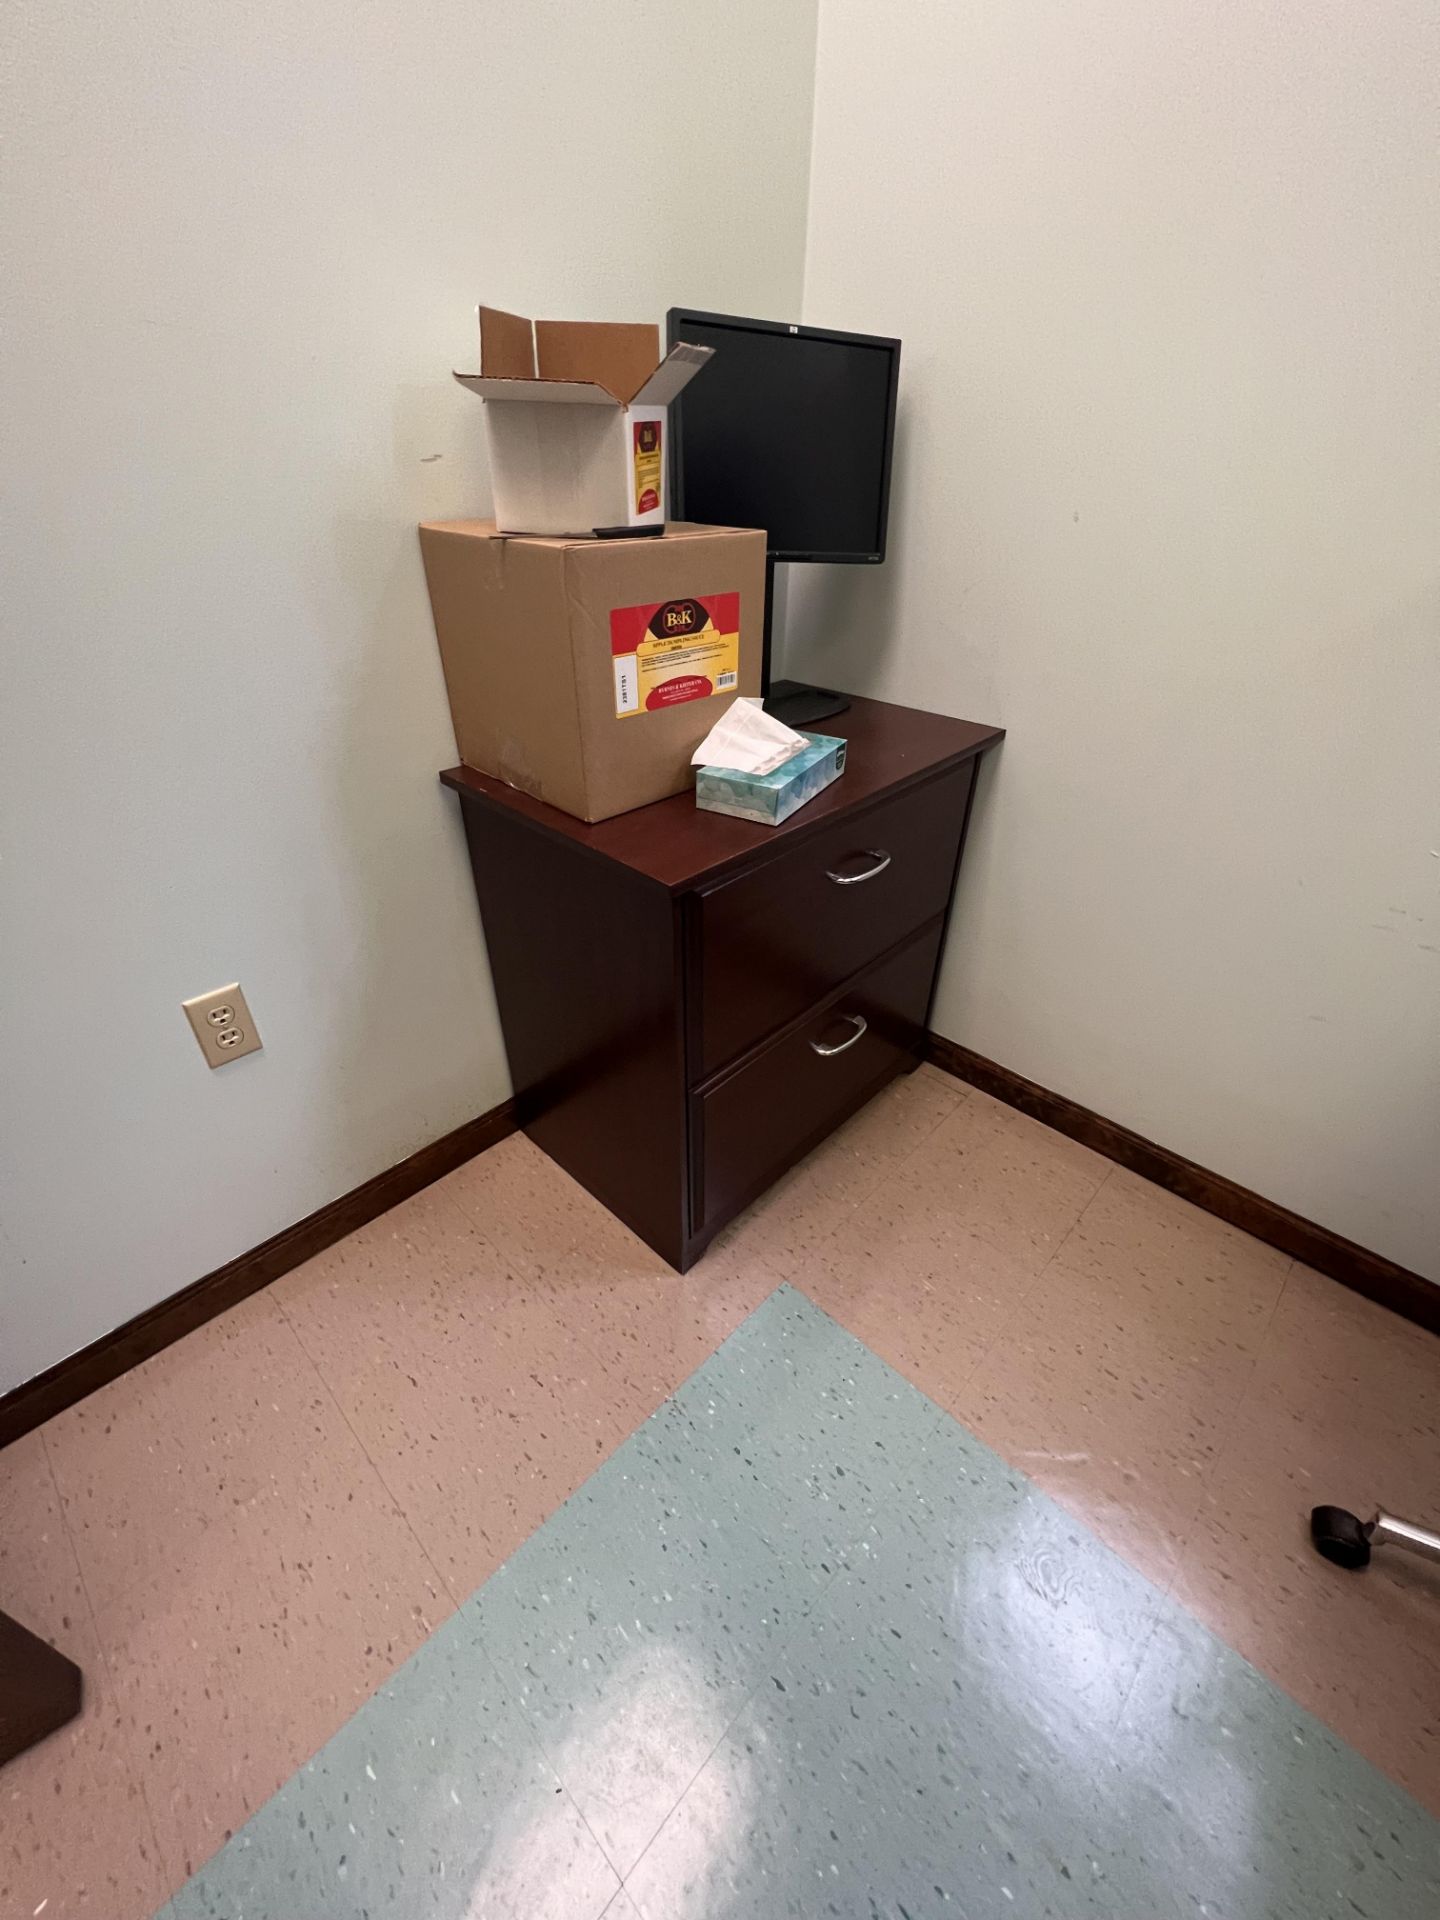 CONTENTS OF OFFICE, INCLUDES DESK, CABINETS, CHAIRS, ETC, DOES NOT INCLUDE PHONE OR COMPUTER - Bild 4 aus 4